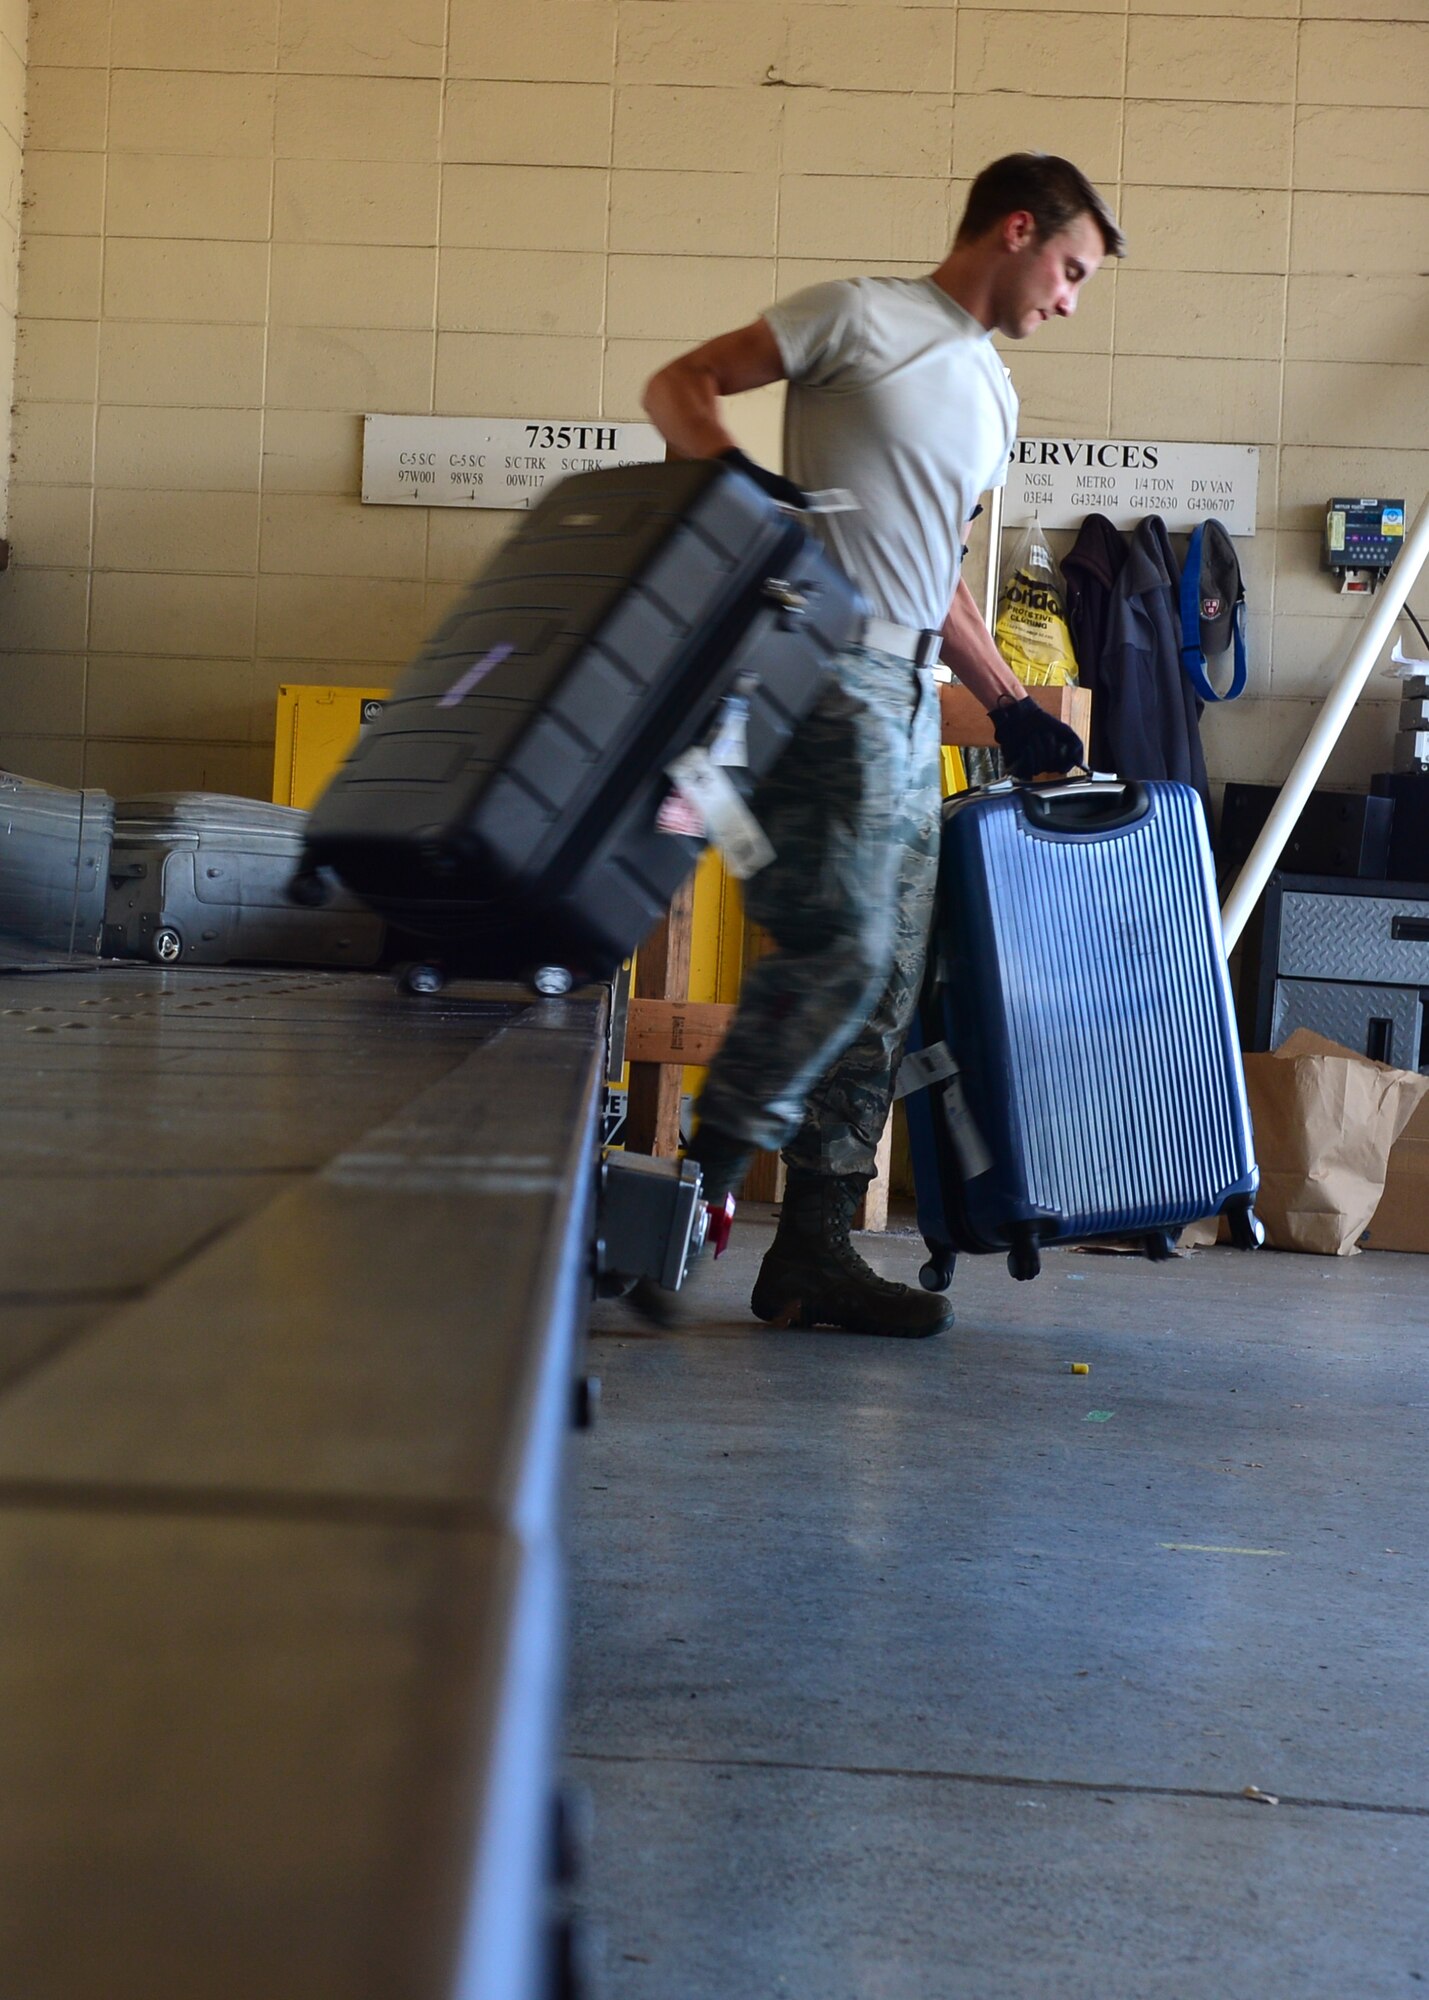 Senior Airman Patrick Lokhaiser, an Air Force Reservist from the 32nd Aerial Port Squadron, Pittsburgh Air Reserve Station, moves luggage from a conveyor belt to a pallet to be loaded on an aircraft on Joint Base Pearl Harbor-Hickam, April 14, 2016. Approximately 30 Airmen from the 32nd APS traveled to JBPHH to conduct annual training hosted by the Airmen of the 735th Air Mobility Squadron. (U.S. Air Force photo by Tech. Sgt. Aaron Oelrich/Released)